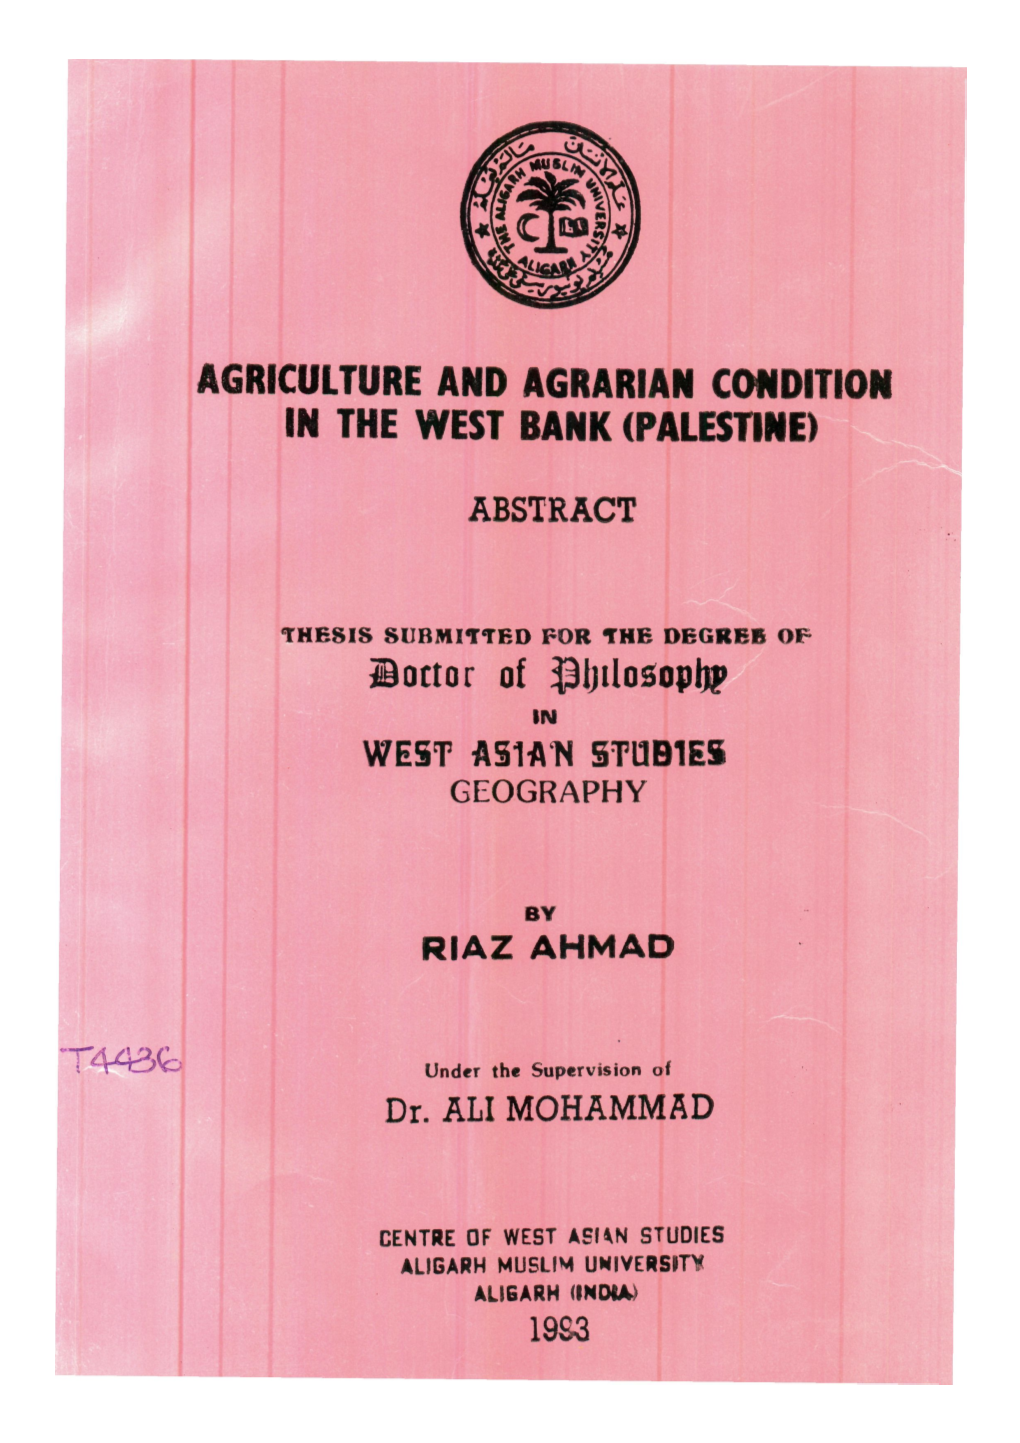 Agriculture and Agrarian Condition in the West Bank (Palestine)